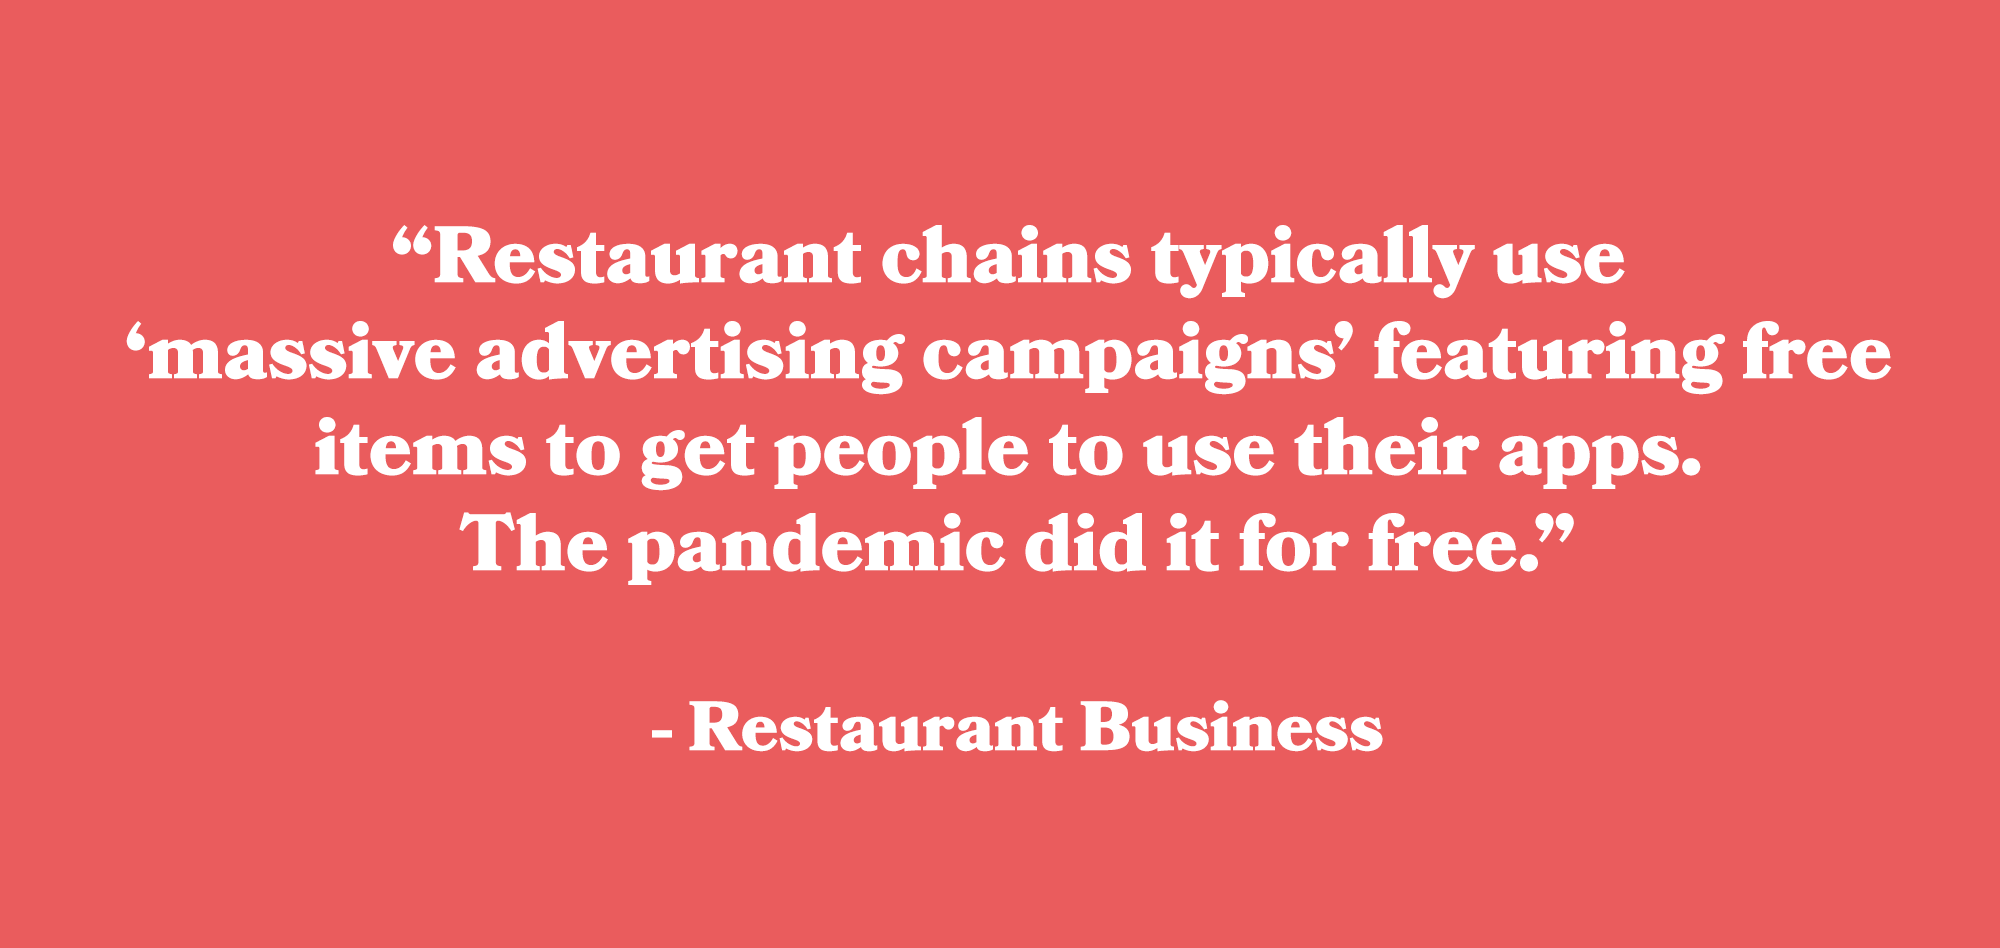 Quote from Restaurant BusinessRestaurant chains typically use massive advertising campaigns featuring free items to get people to use their apps. The pandemic did it for free.